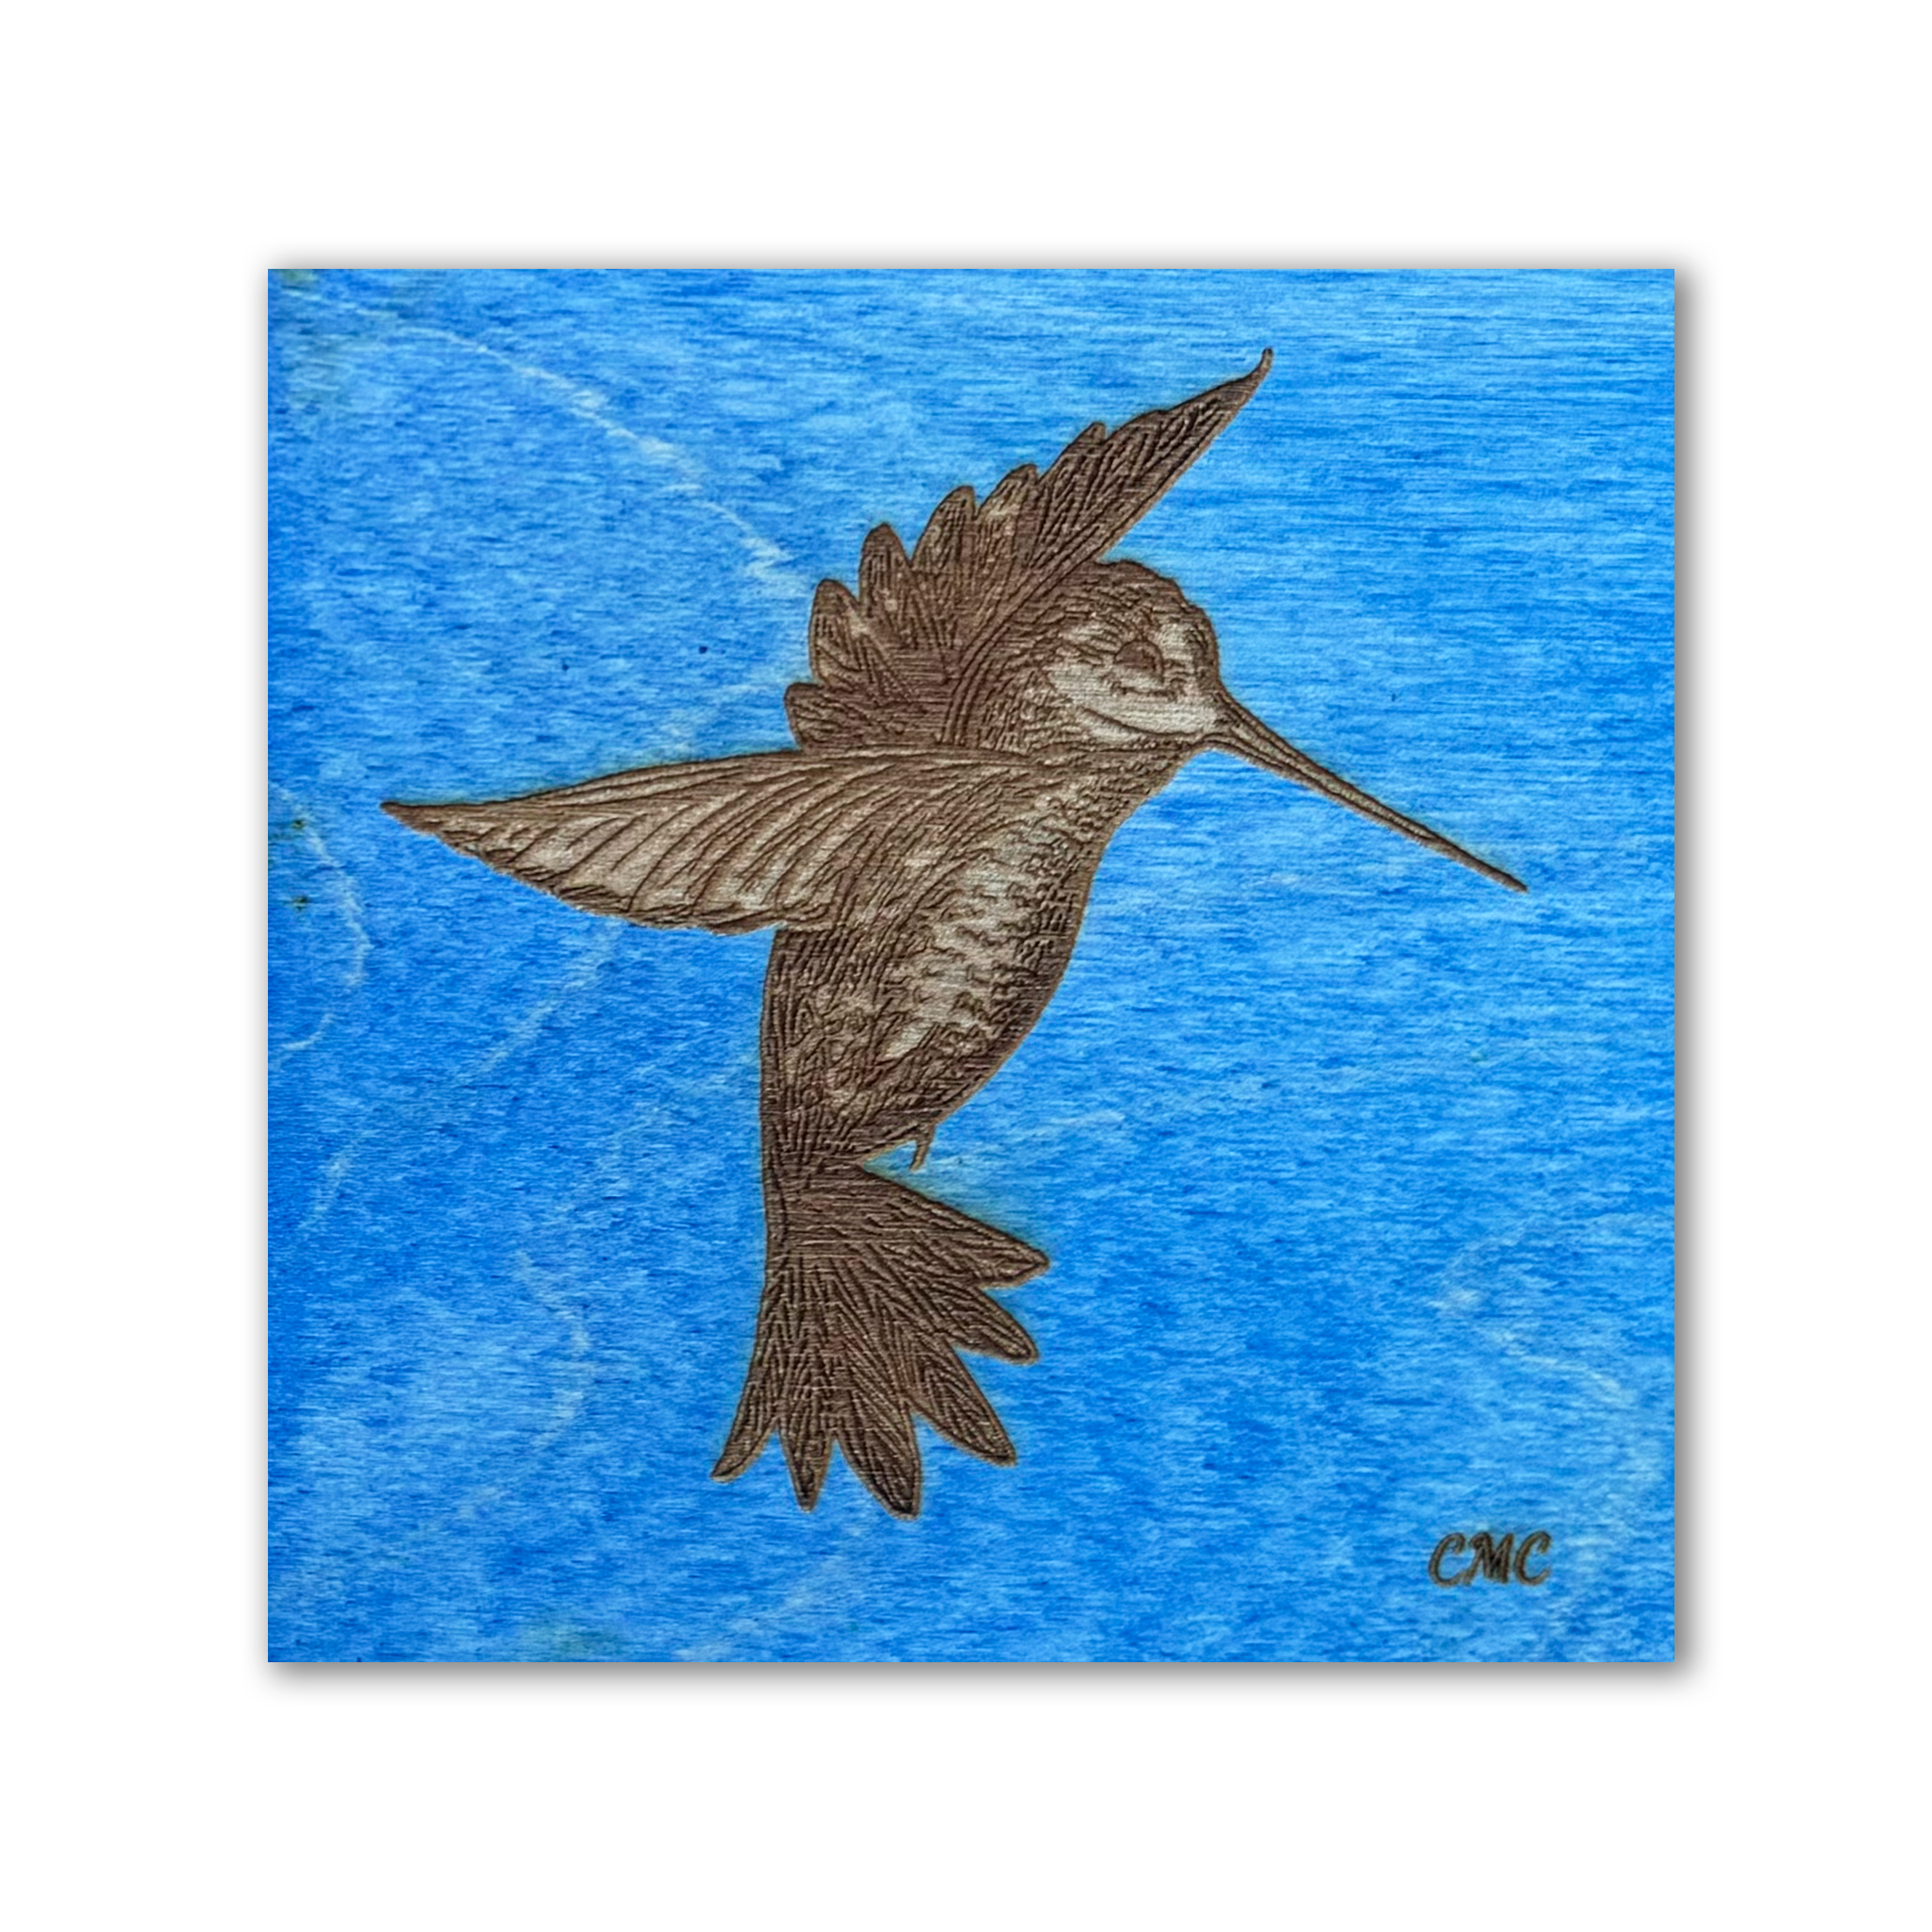 Laser engraved hovering humminbird on blue stain baltic birch tile 